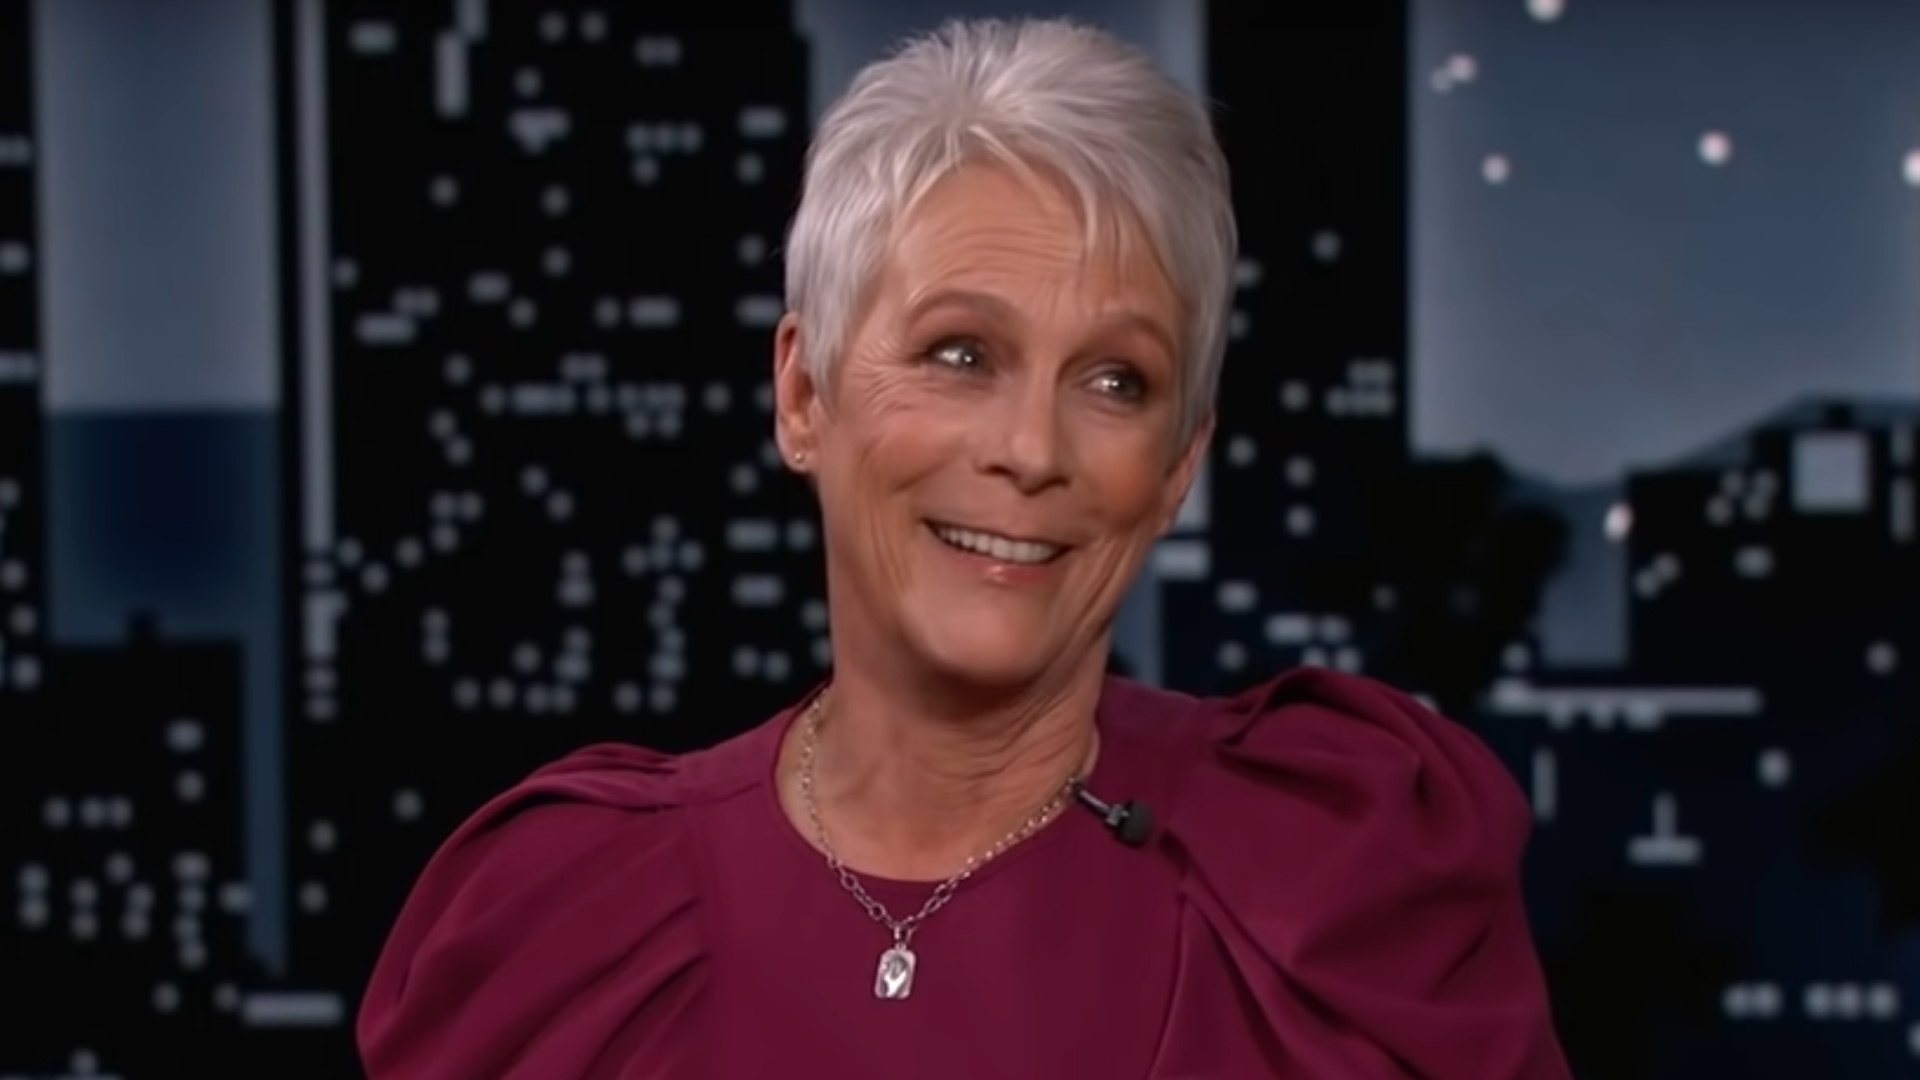  Jamie Lee Curtis will lead her daughter's wedding in World of Warcraft cosplay 